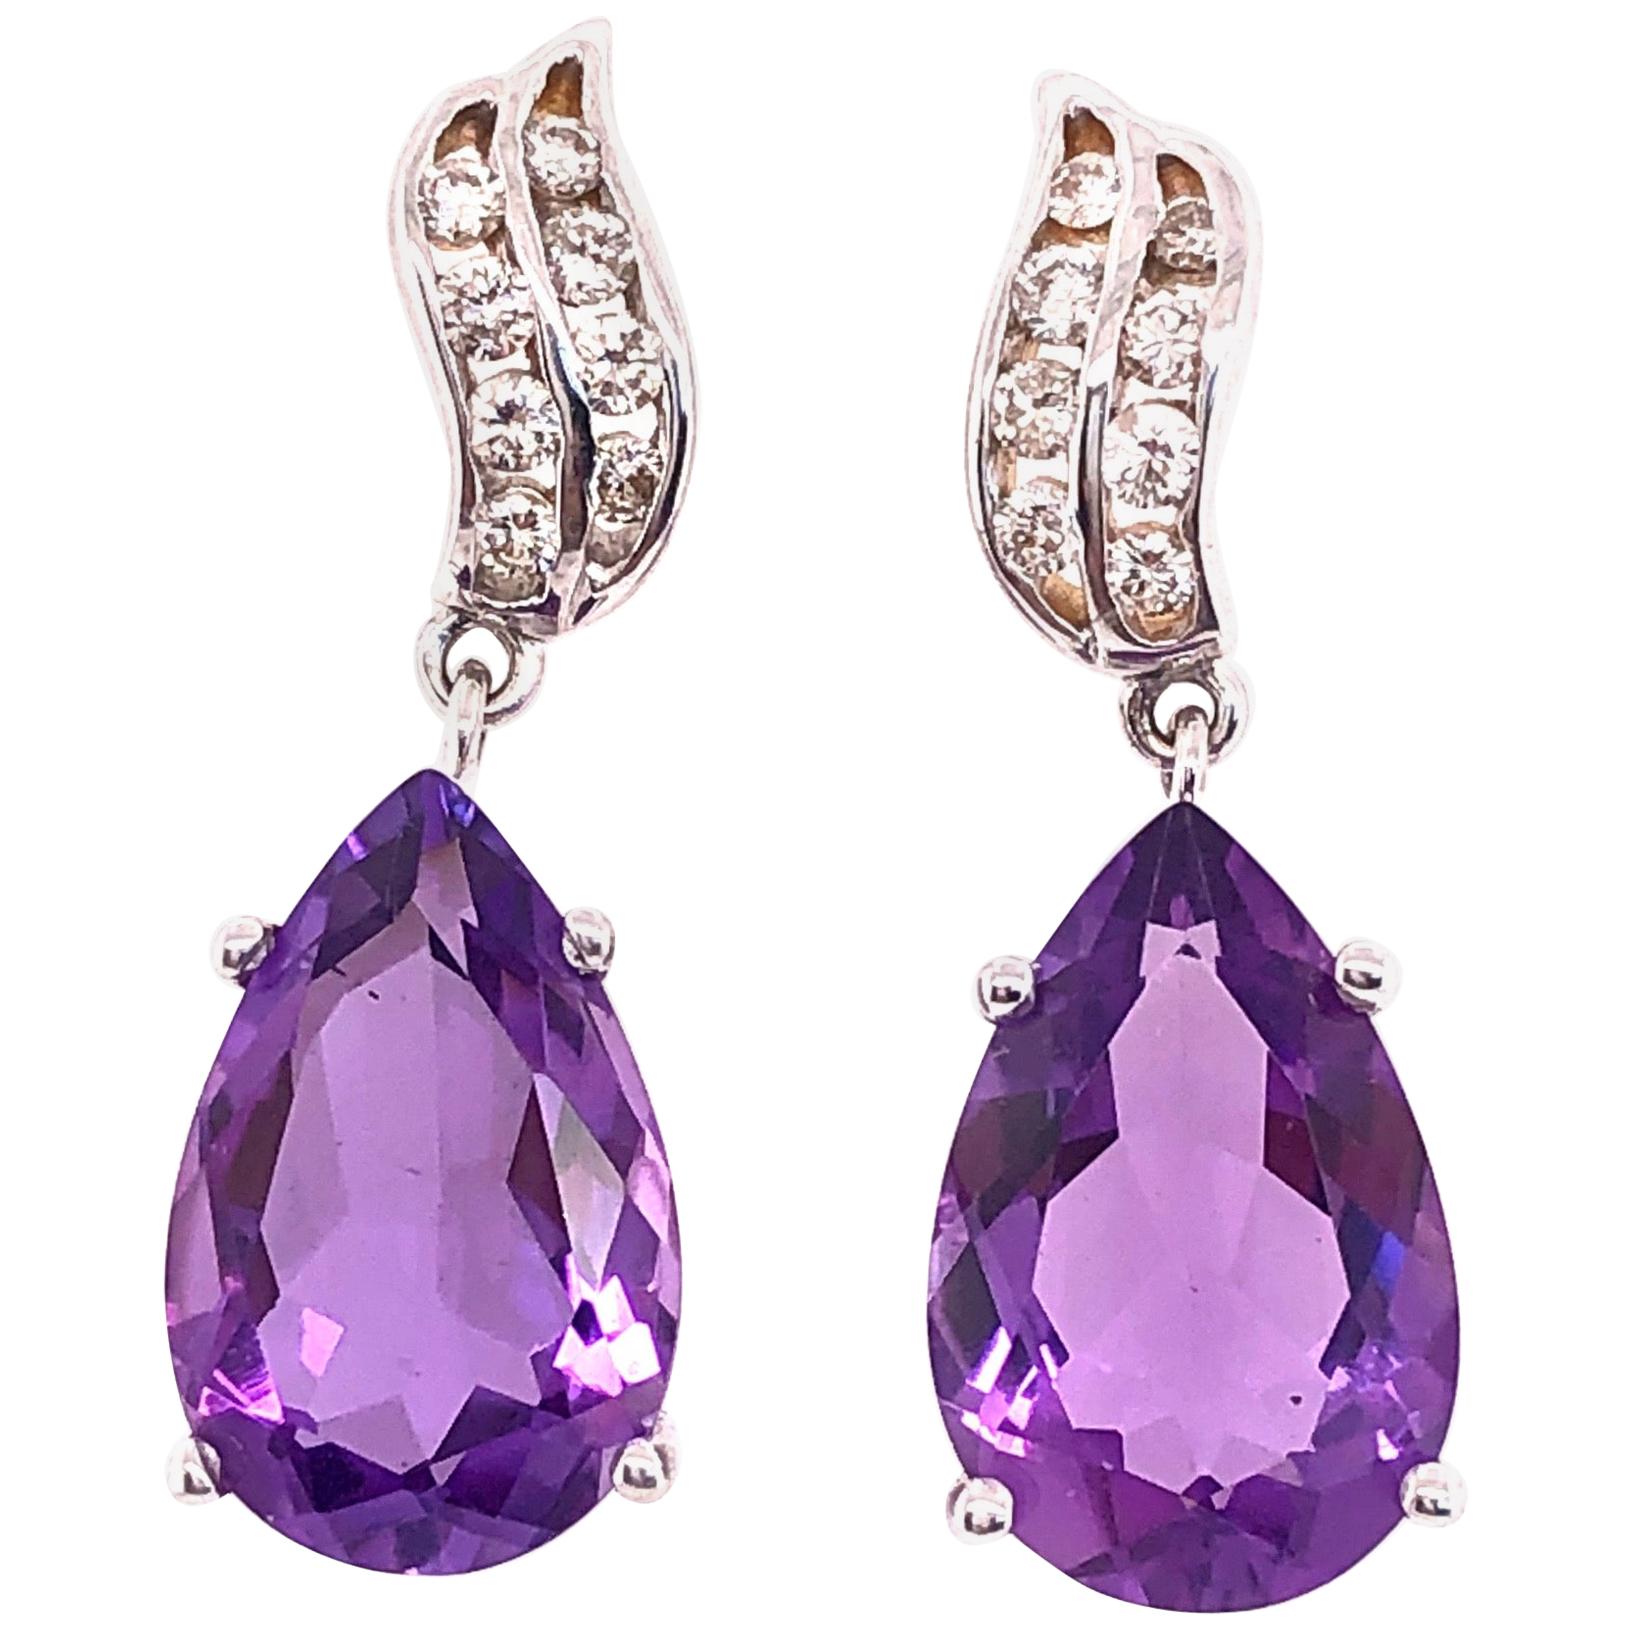 14 Karat Gold Earrings with Diamonds and Amethysts 0.50 Total Diamond Weight